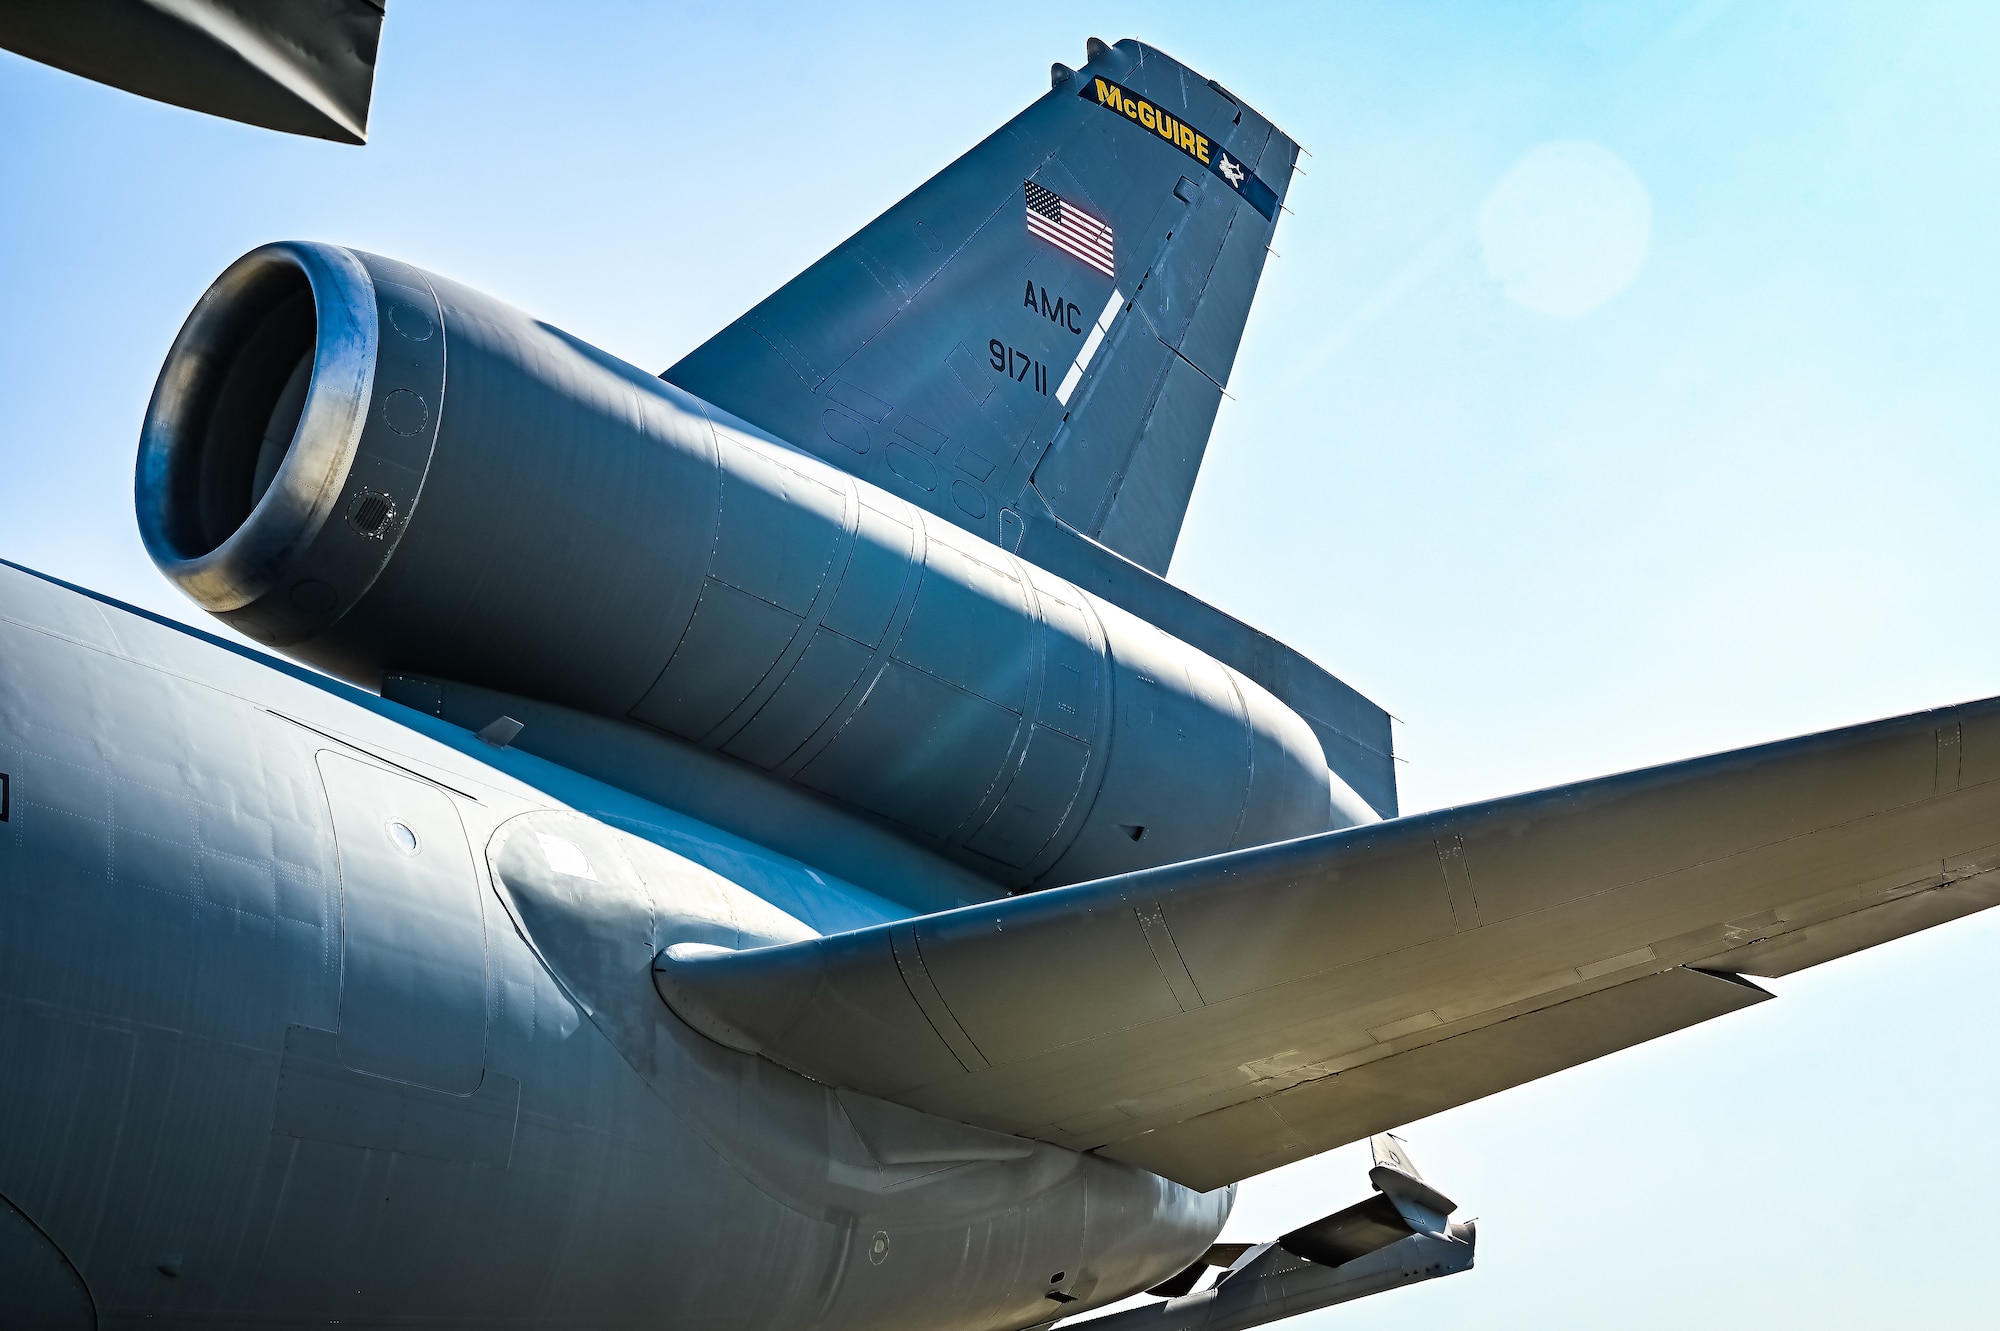 A KC-10 Extender assigned to the 305th Air Mobility Wing is prepped for its final sorite on 11 May, 2023 at Joint Base McGuire-Dix-Lakehurst, N.J. The 305th AMW extends America's global reach by generating, mobilizing and deploying KC-10 Extenders and C-17 Globemaster III’s to conduct strategic airlift and air refueling missions worldwide. In November 2021, the Wing began transitioning to the new KC-46A Pegasus air refueling aircraft.